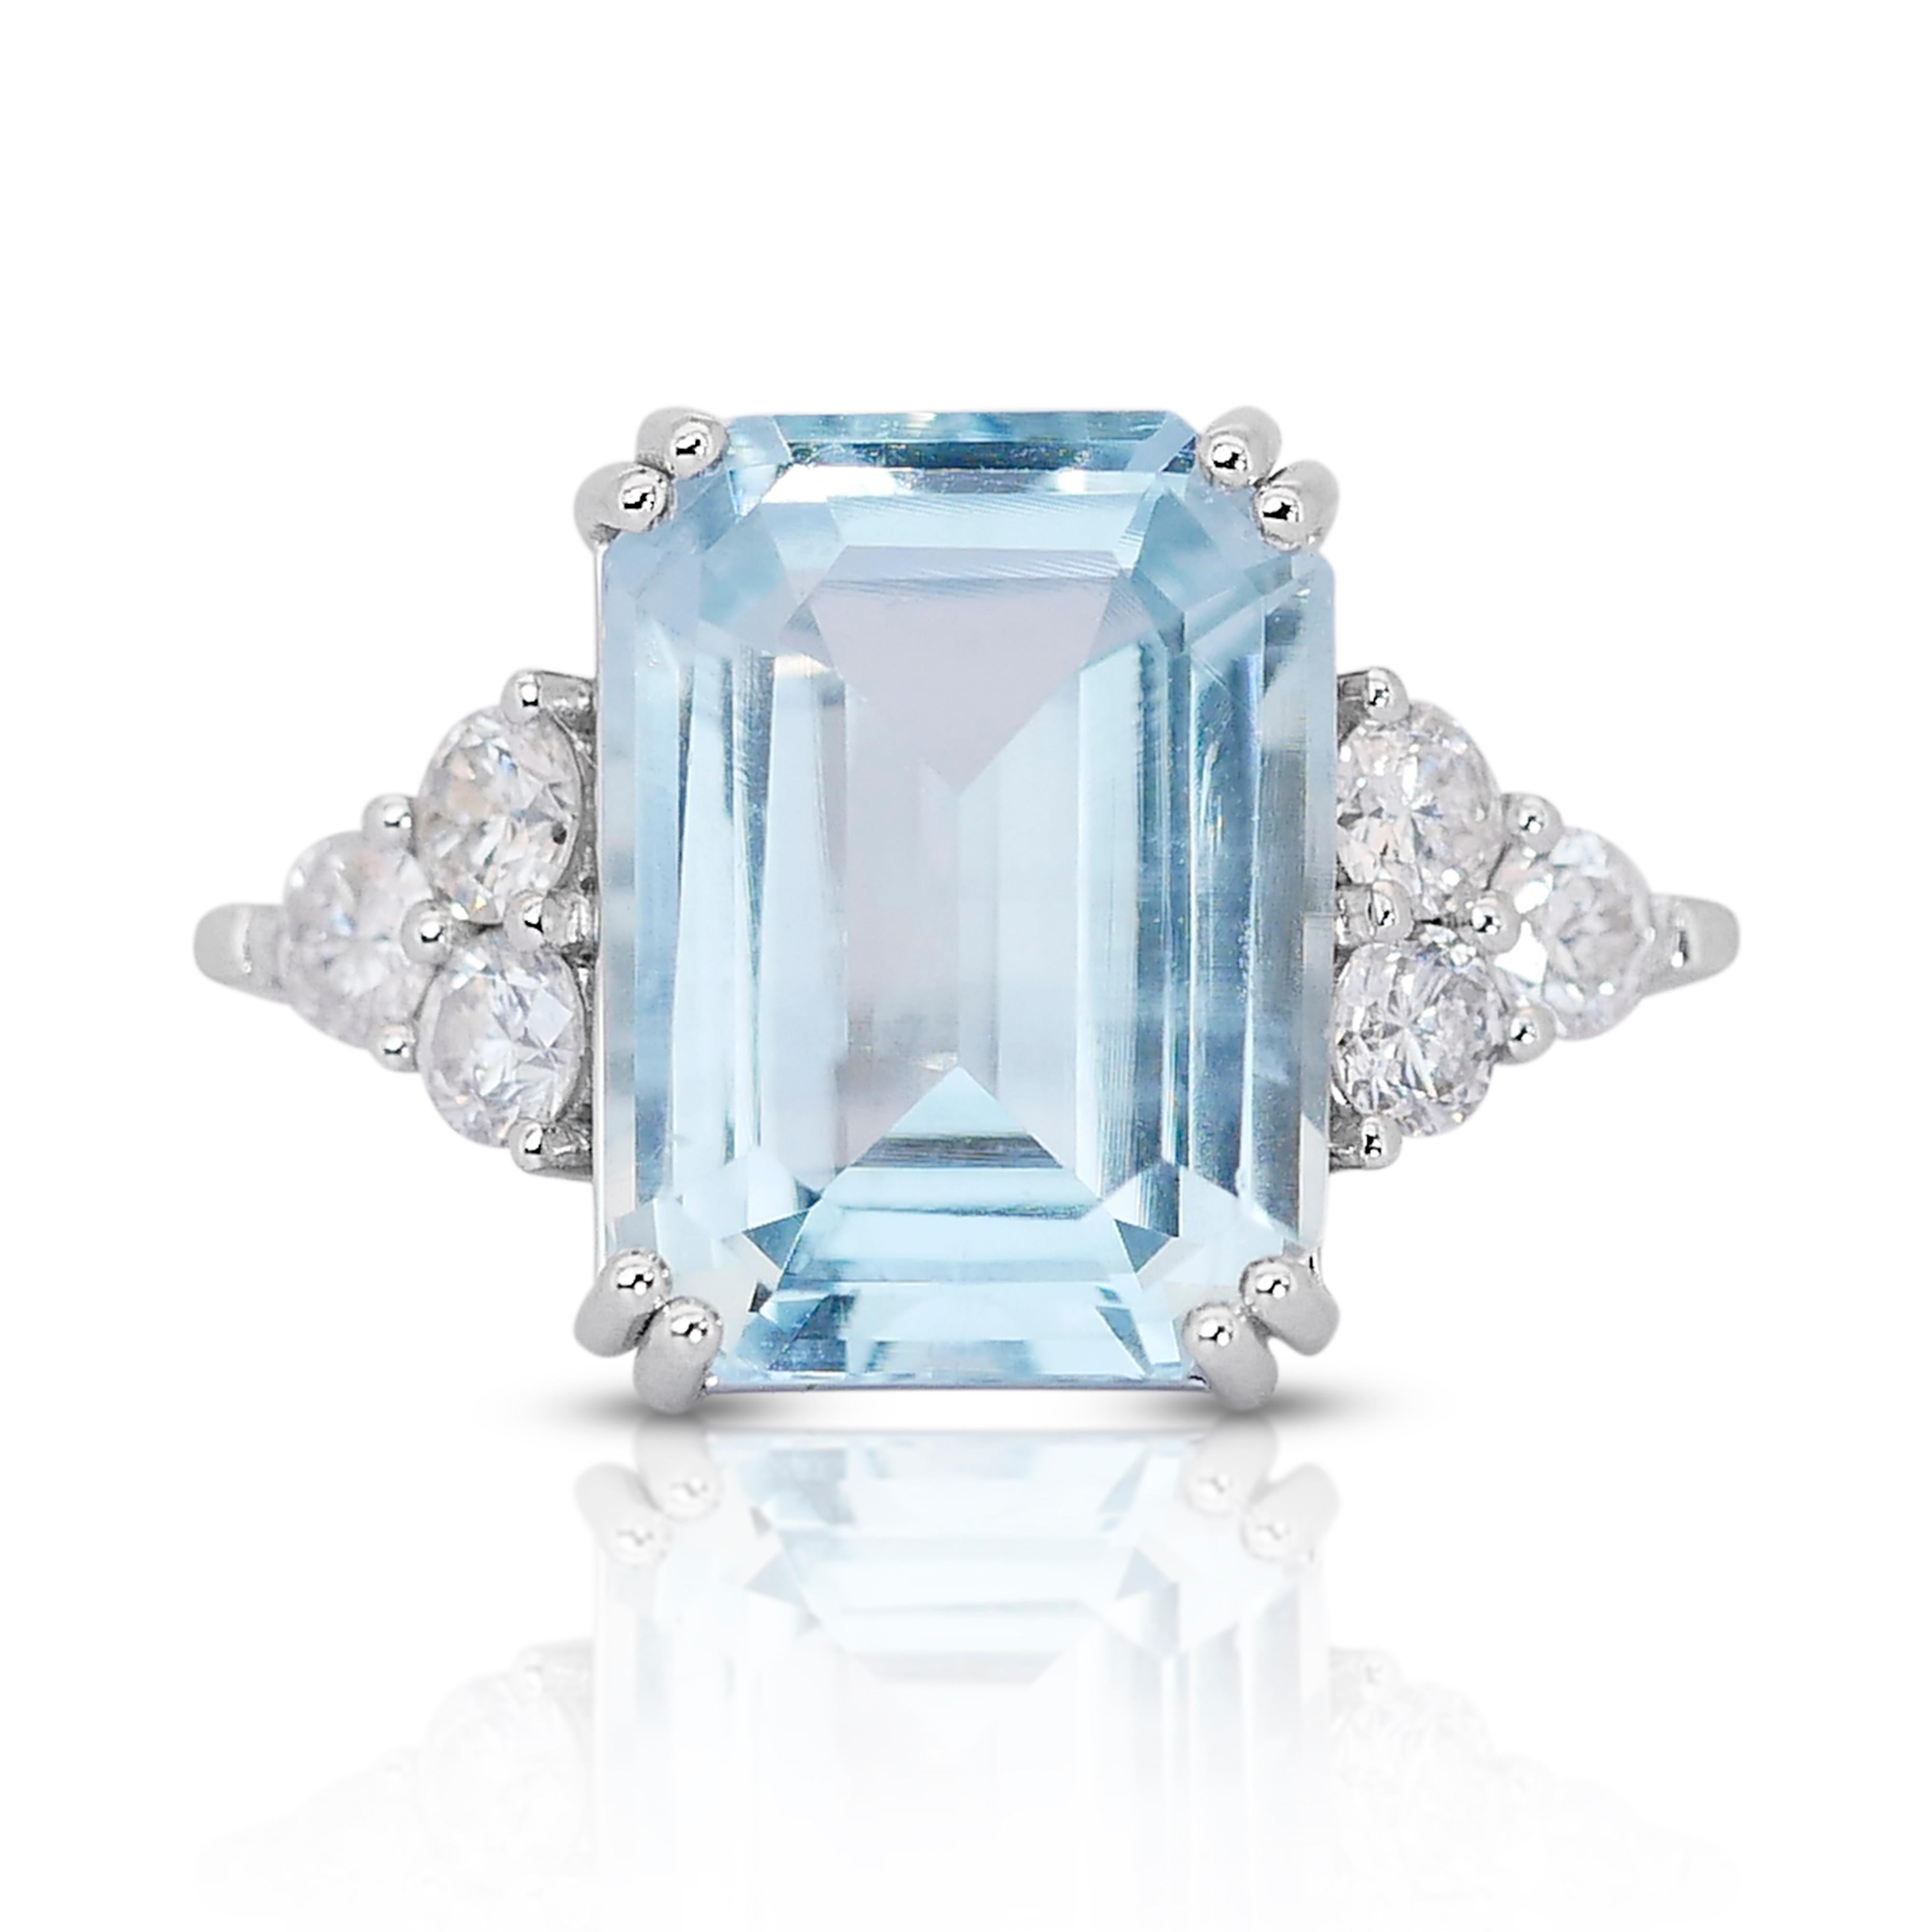 This enchanting ring features a striking emerald-cut aquamarine as its centerpiece, boasting a generous weight of 8.80 carats. The aquamarine displays a serene light or pale blue hue, reminiscent of a tranquil ocean on a sunny day. With its